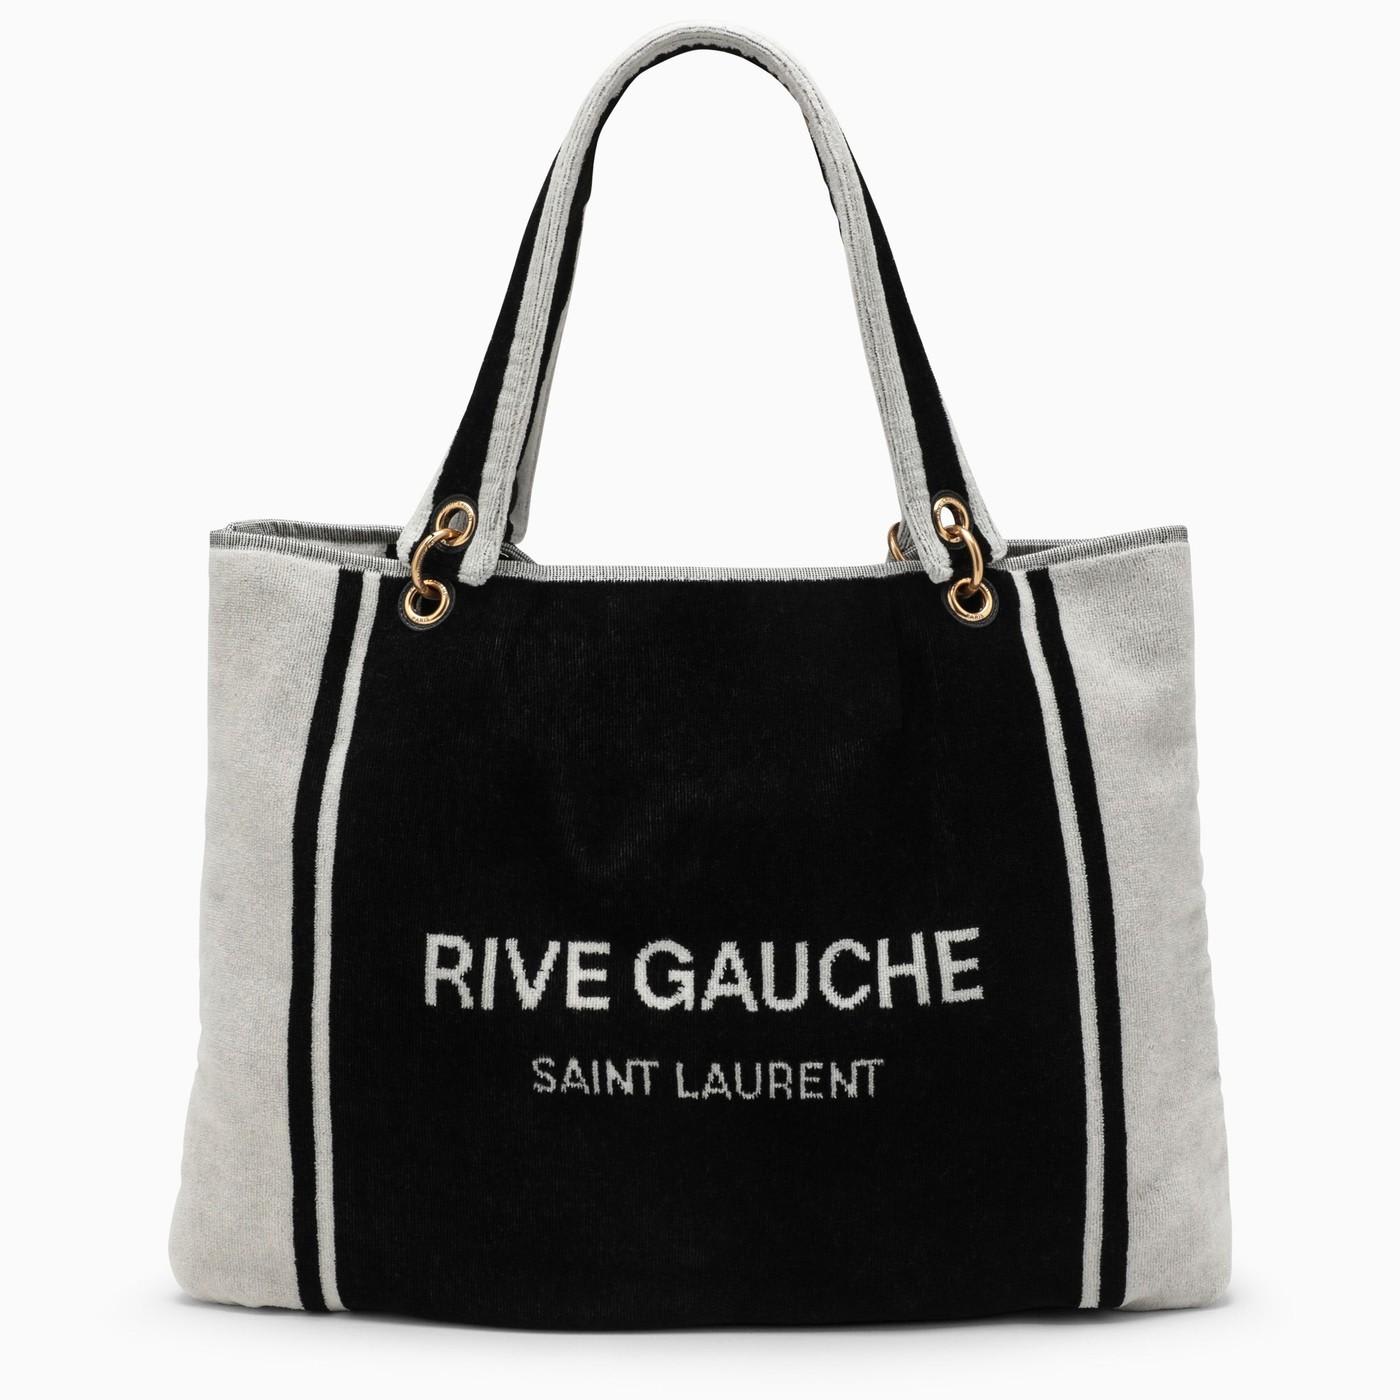 Shop Saint Laurent Rive Gauche Tote In Black And White Terry Cloth